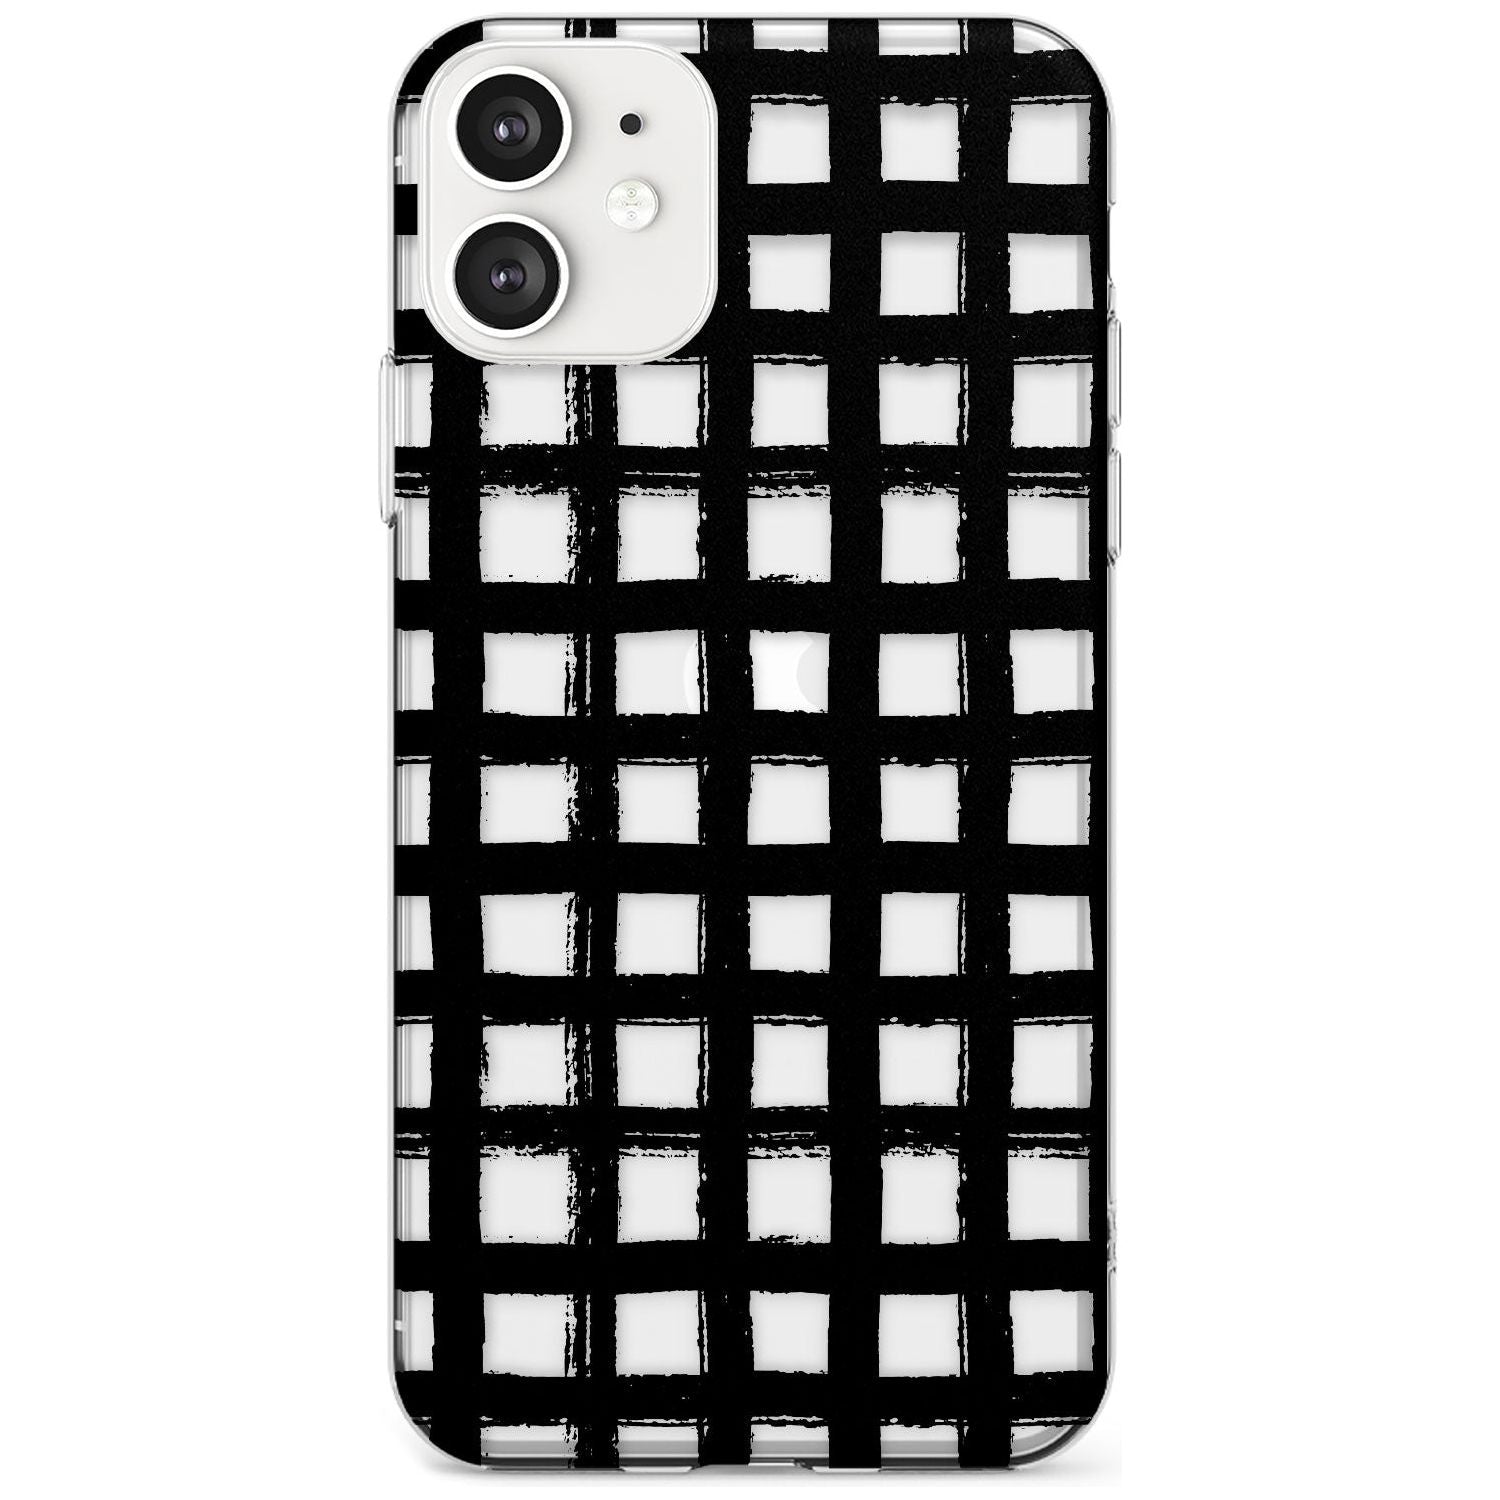 Messy Black Grid - Clear Black Impact Phone Case for iPhone 11